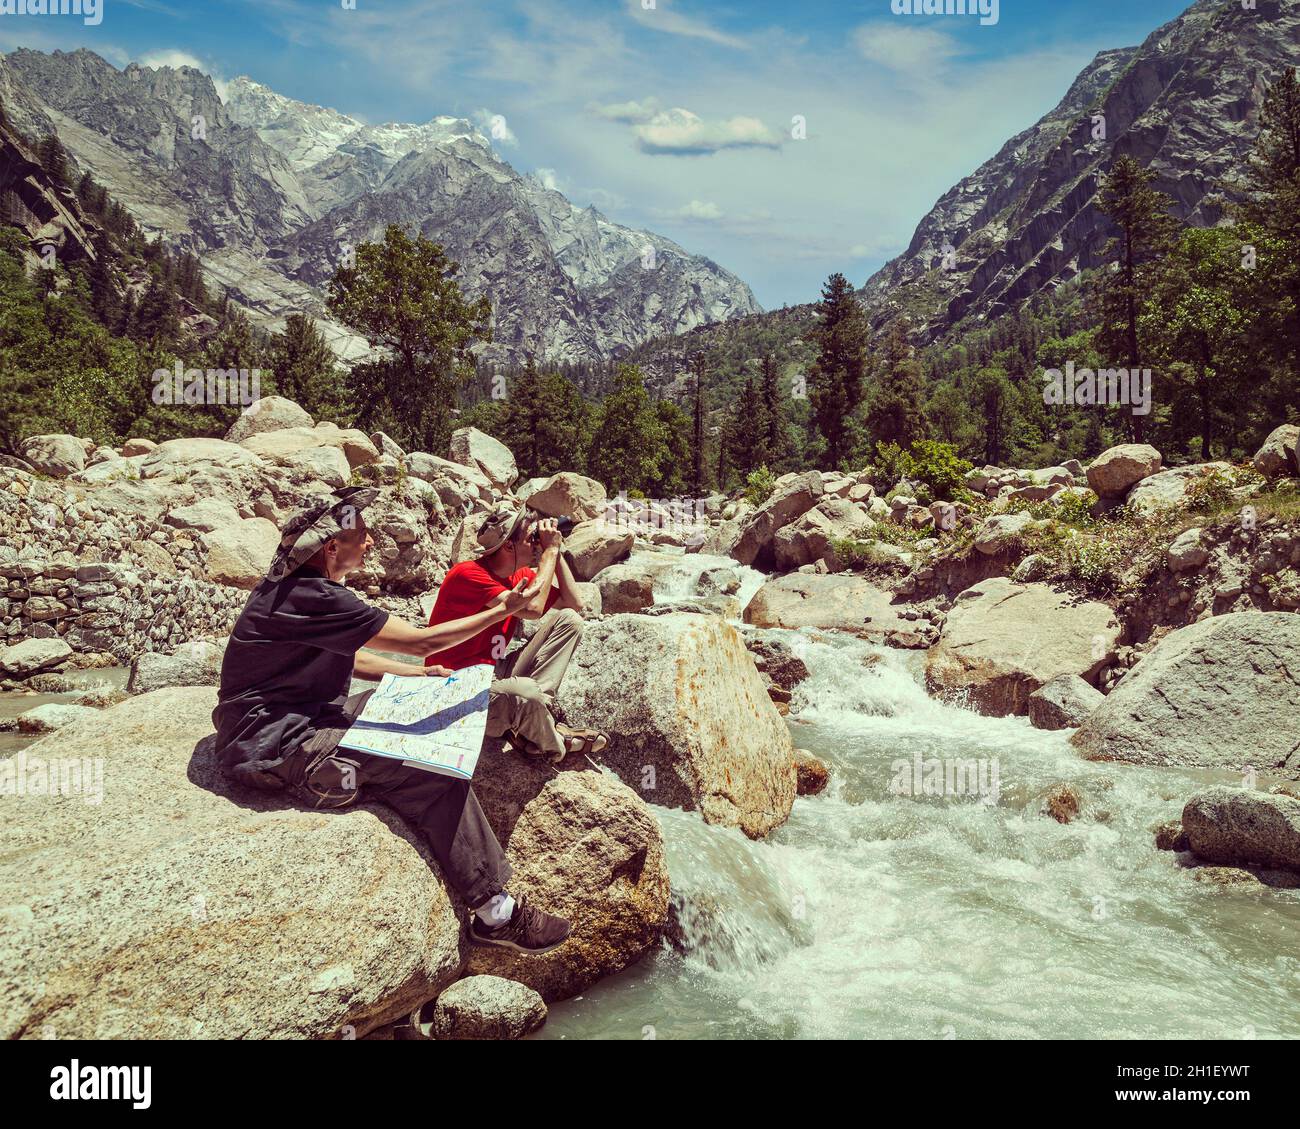 Vintage retro effect filtered hipster style image of hiker trekker tourists read a trekking map on trek in Himalayas mountains. Himachal Pradesh,India Stock Photo